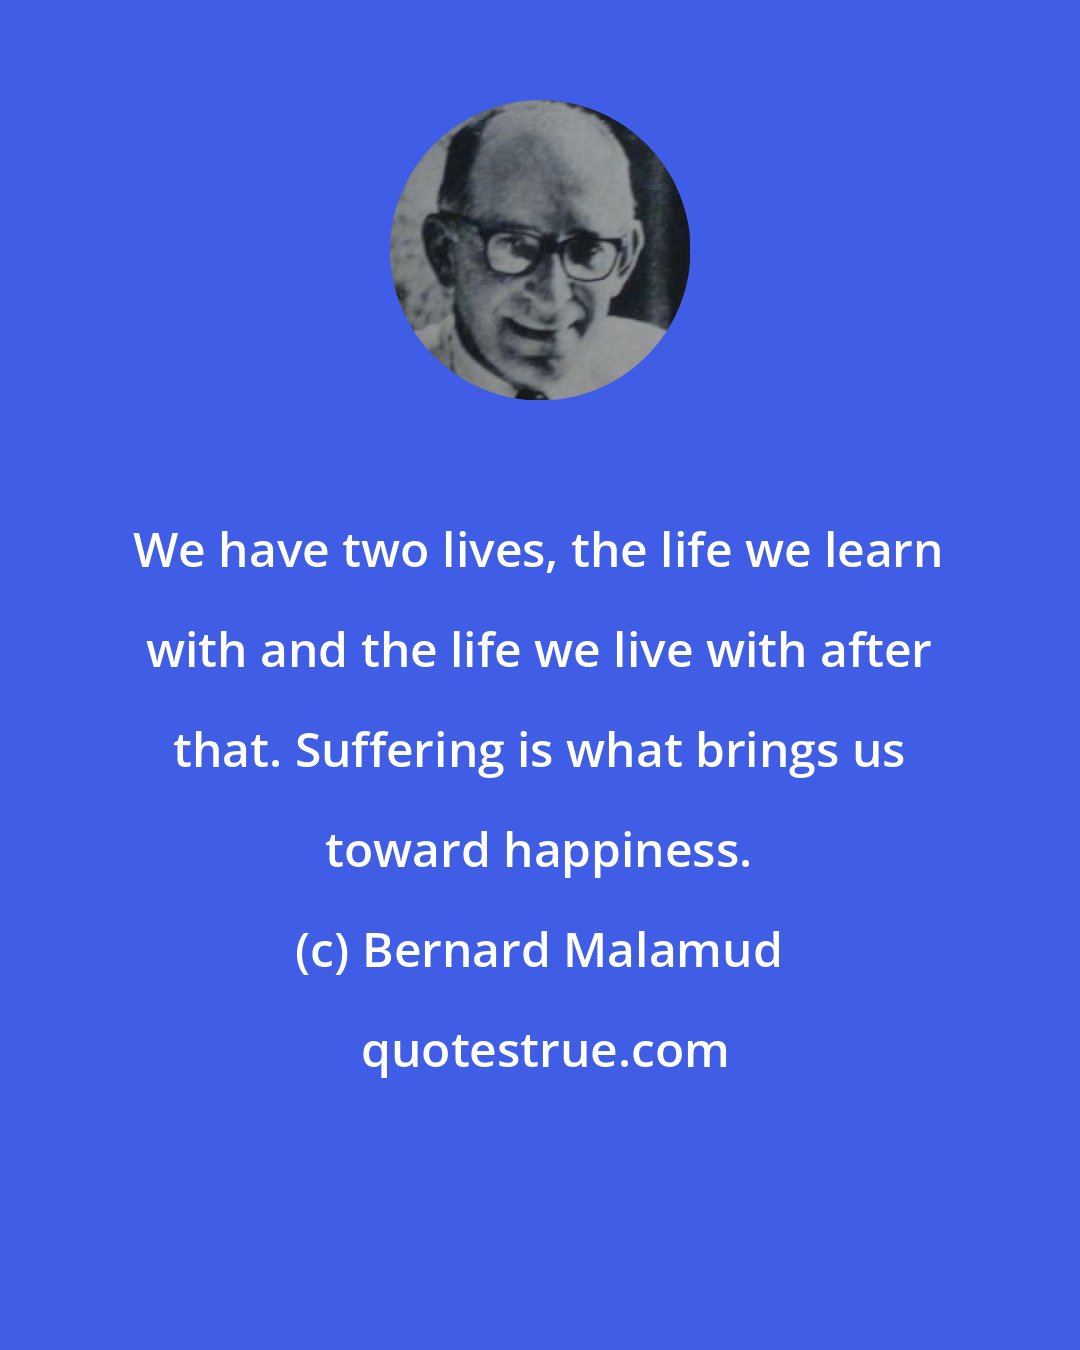 Bernard Malamud: We have two lives, the life we learn with and the life we live with after that. Suffering is what brings us toward happiness.